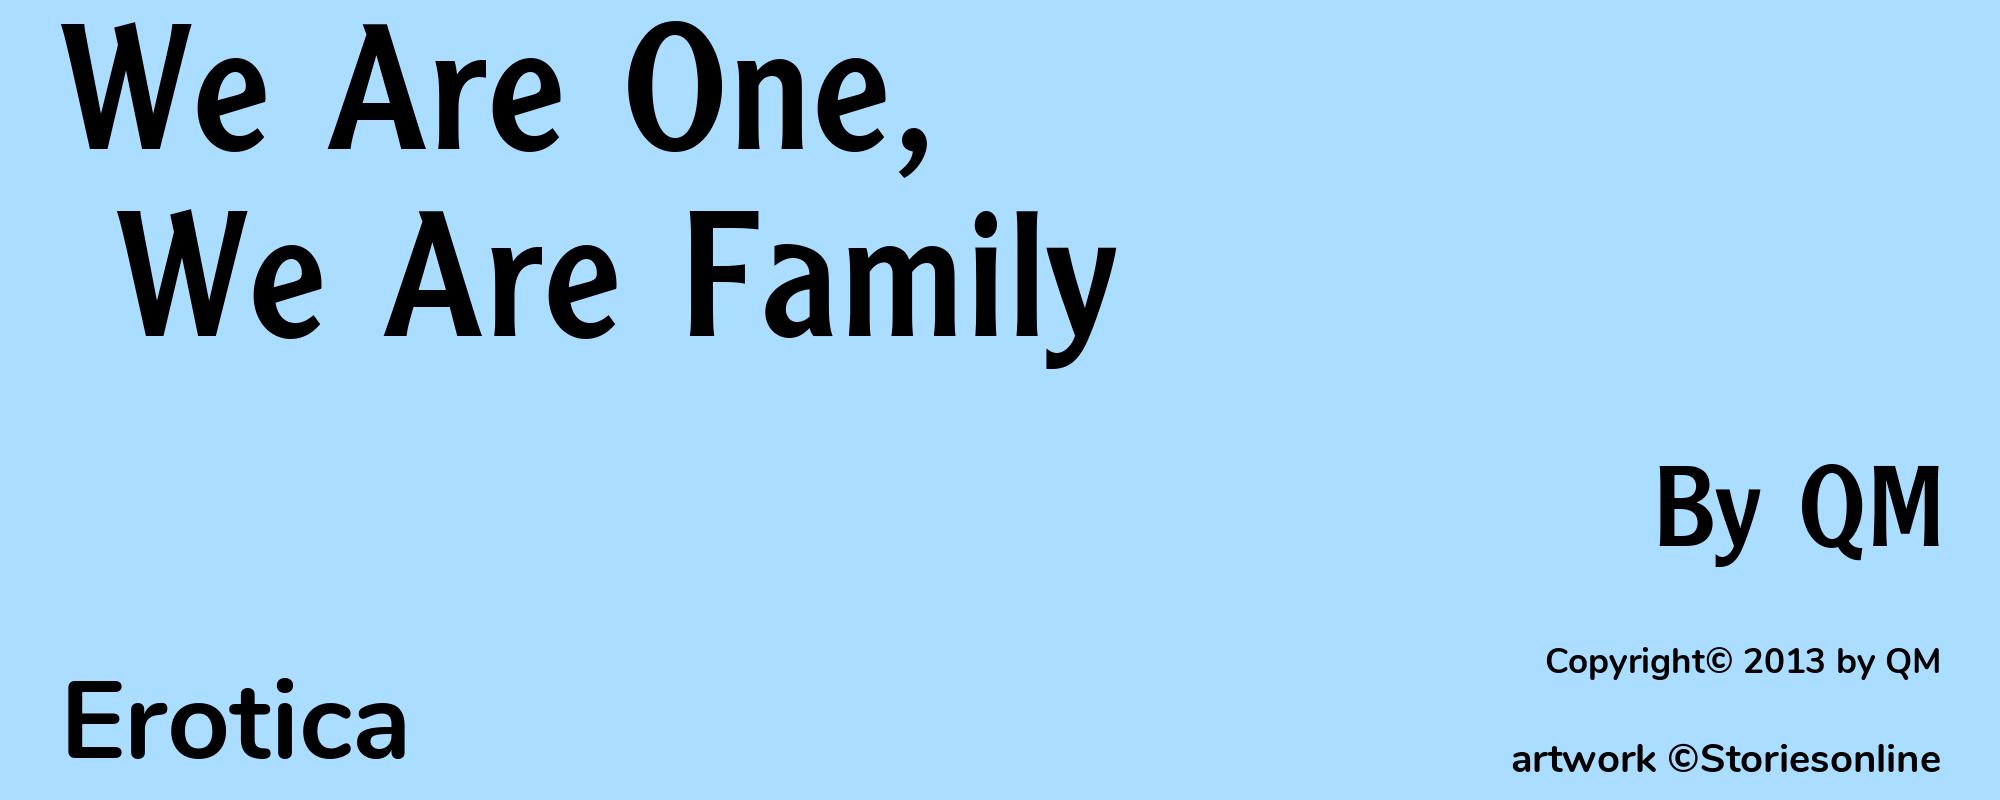 We Are One, We Are Family - Cover